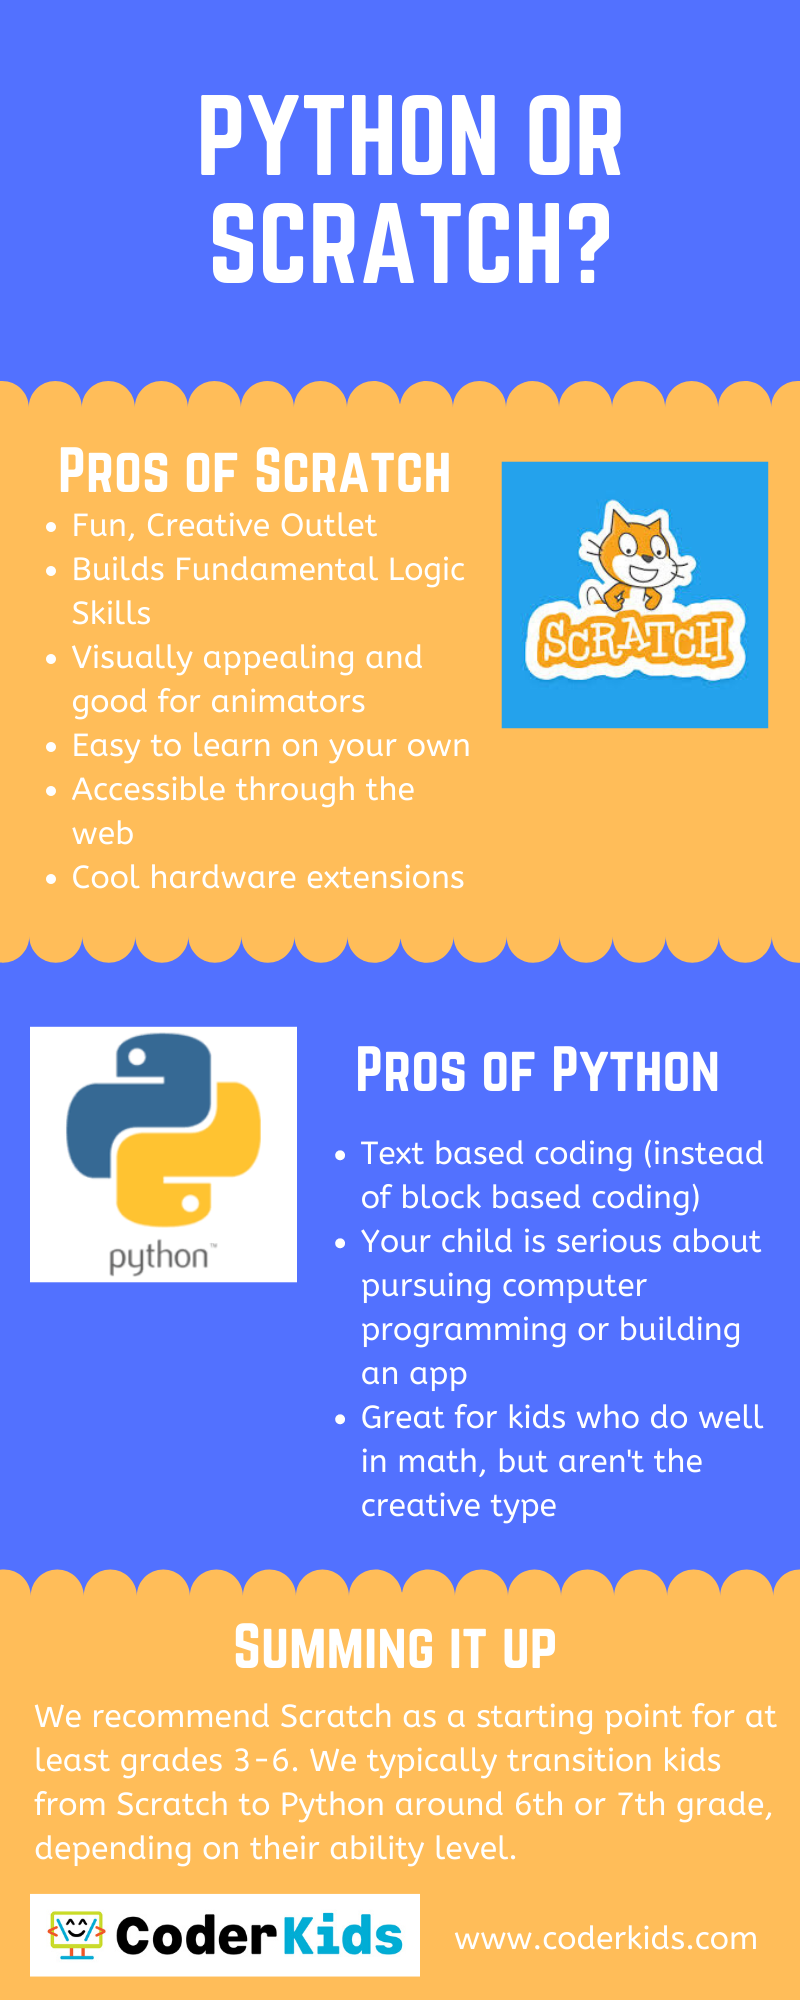 Should I learn Scratch or Python?